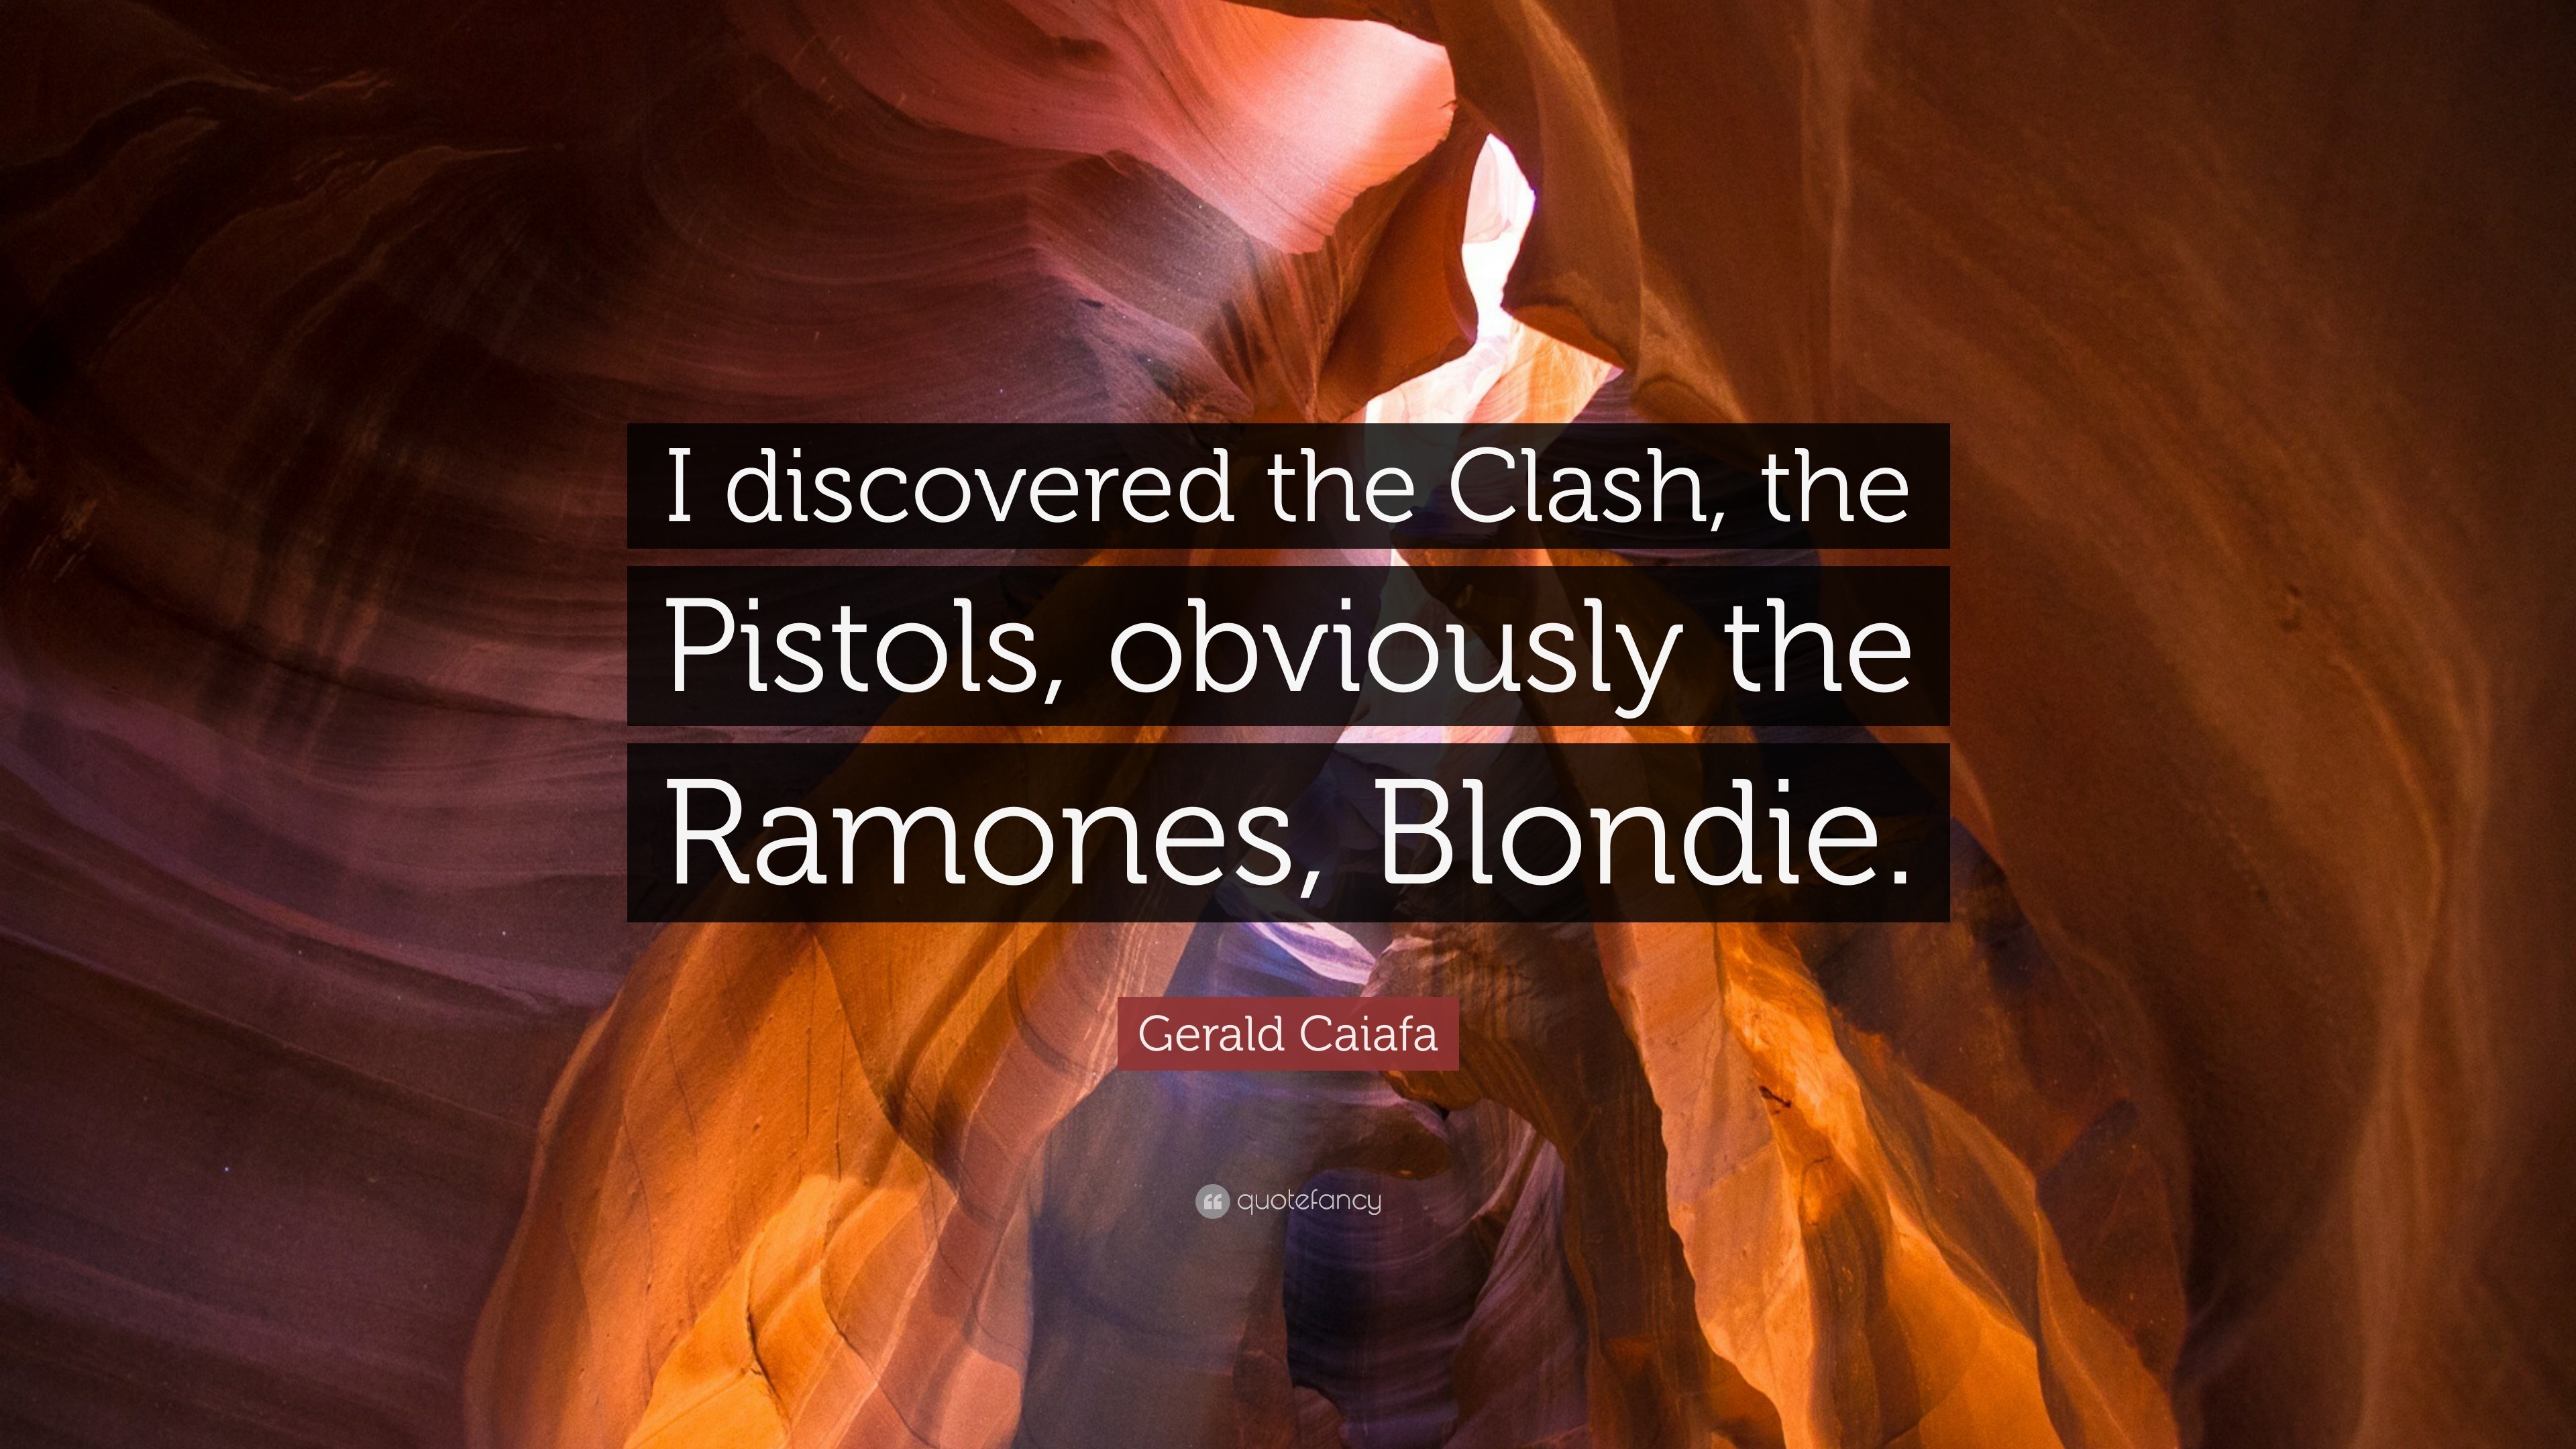 3840x2160 Gerald Caiafa Quote: “I discovered the Clash, the Pistols, obviously the  Ramones